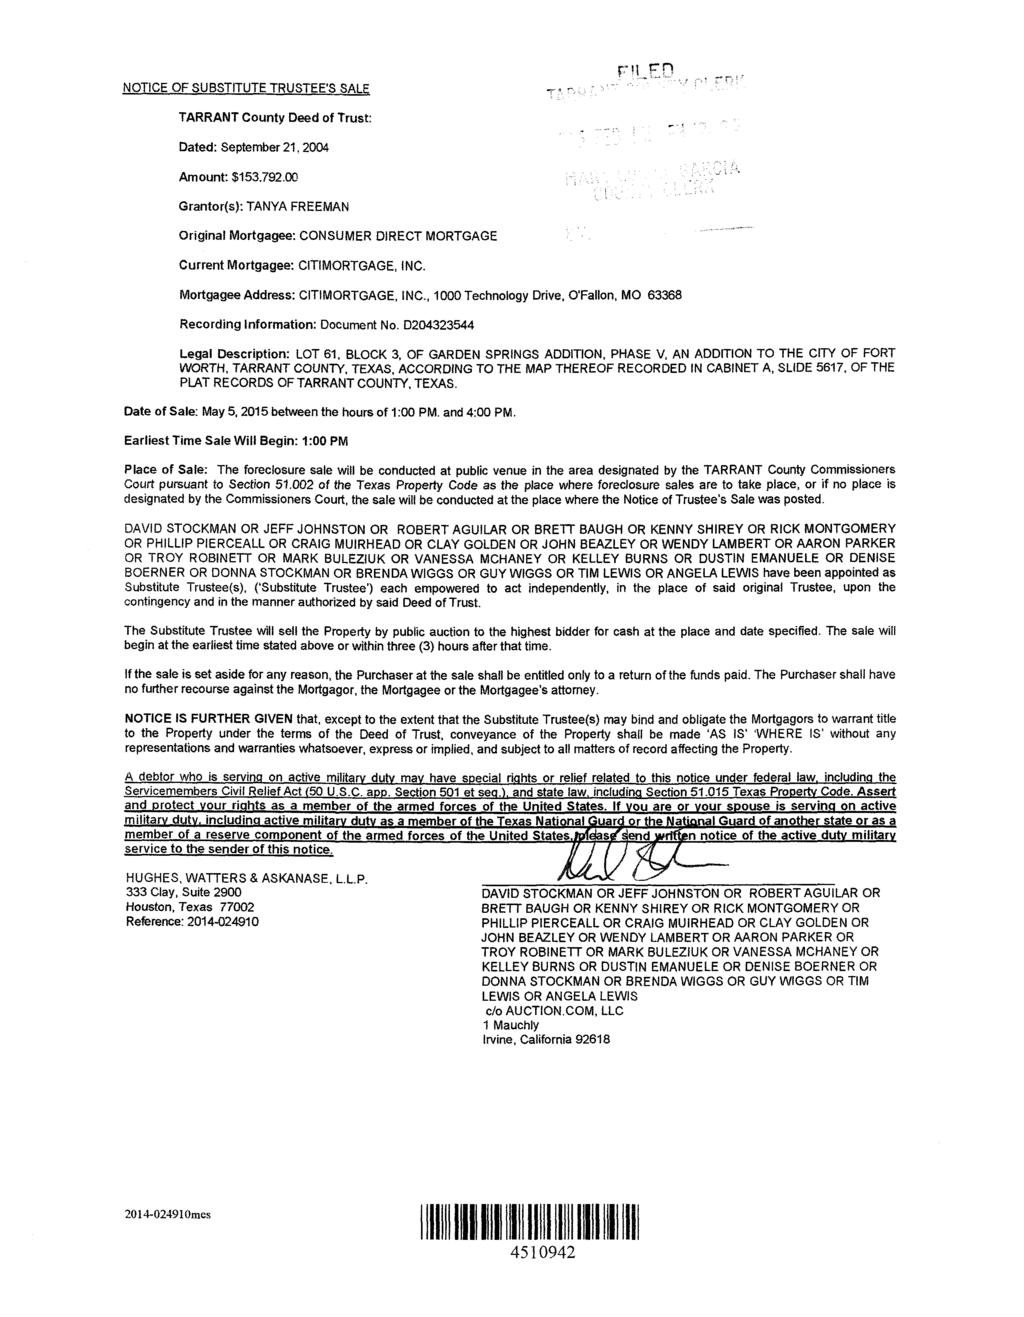 NOTICE OF SUBSTITUTE TRUSTEE'S SALE F!lJ:".0 TARRANT County Deed of Trust: Dated: September 21, 2004 Amount: $153.792.